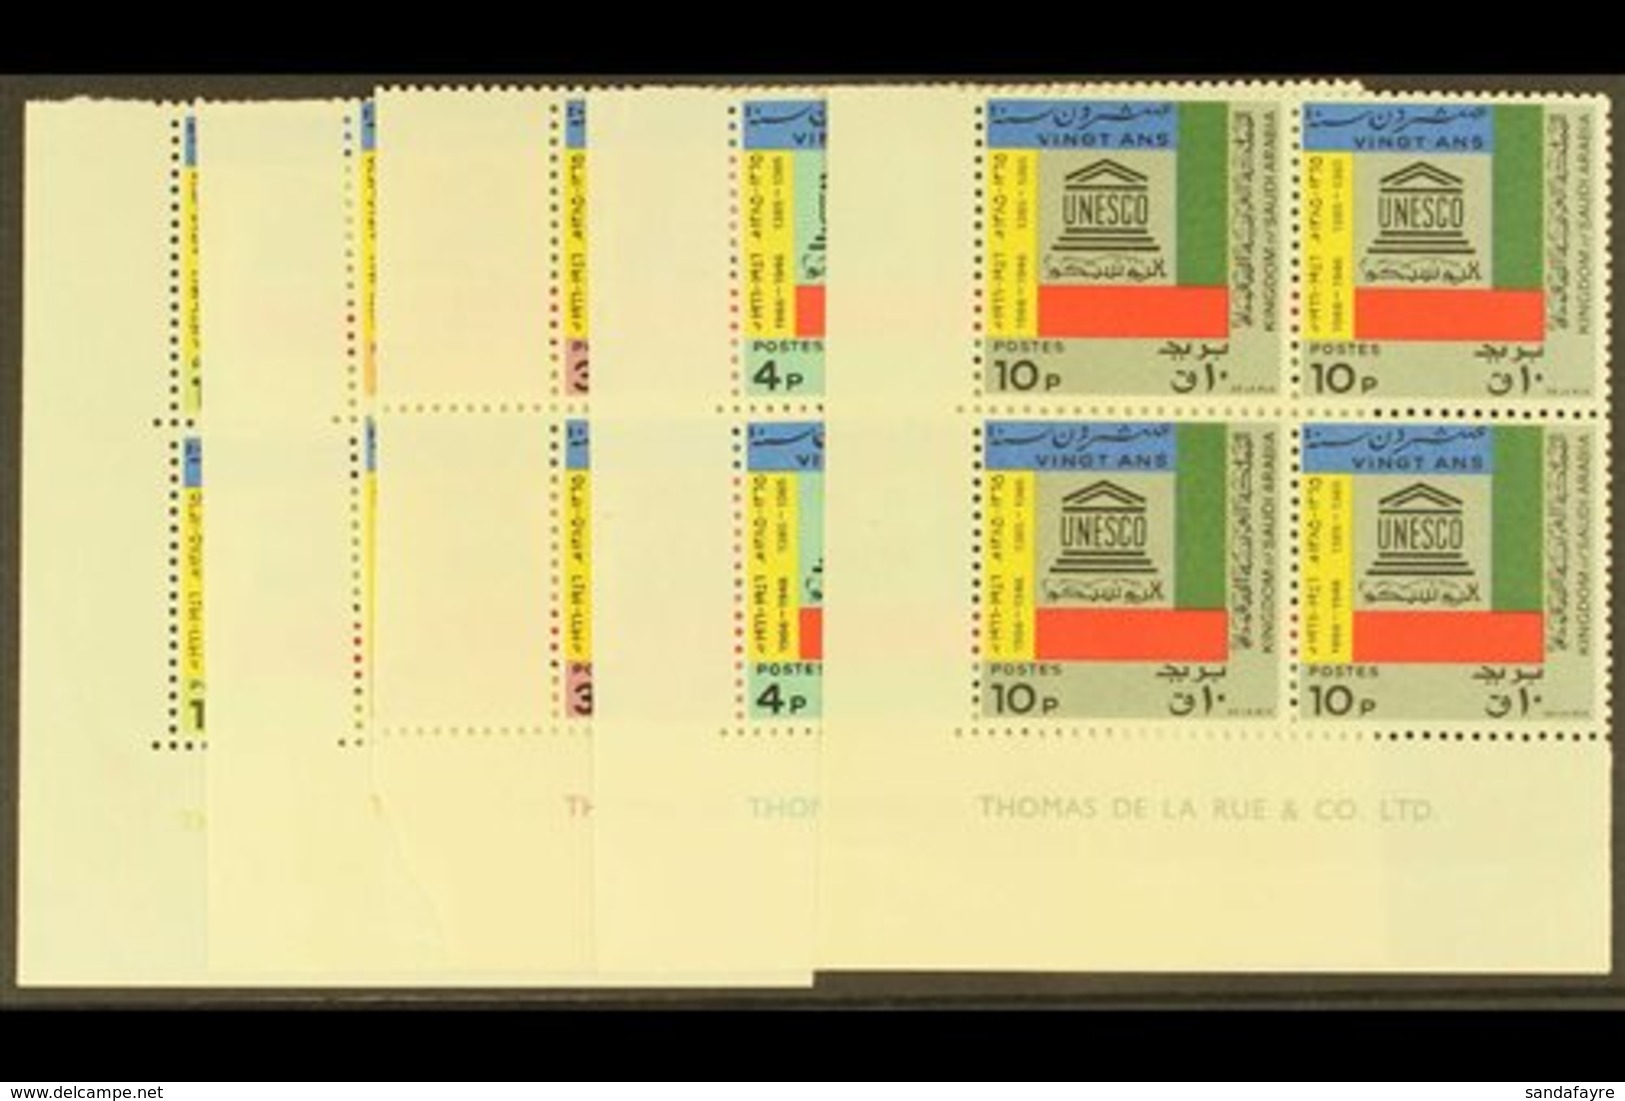 1966 20th Anniv Of UN Orgs, SG 650/654, In Superb Never Hinged Mint Corner Blocks Of 4. (20 Stamps) For More Images, Ple - Saudi Arabia